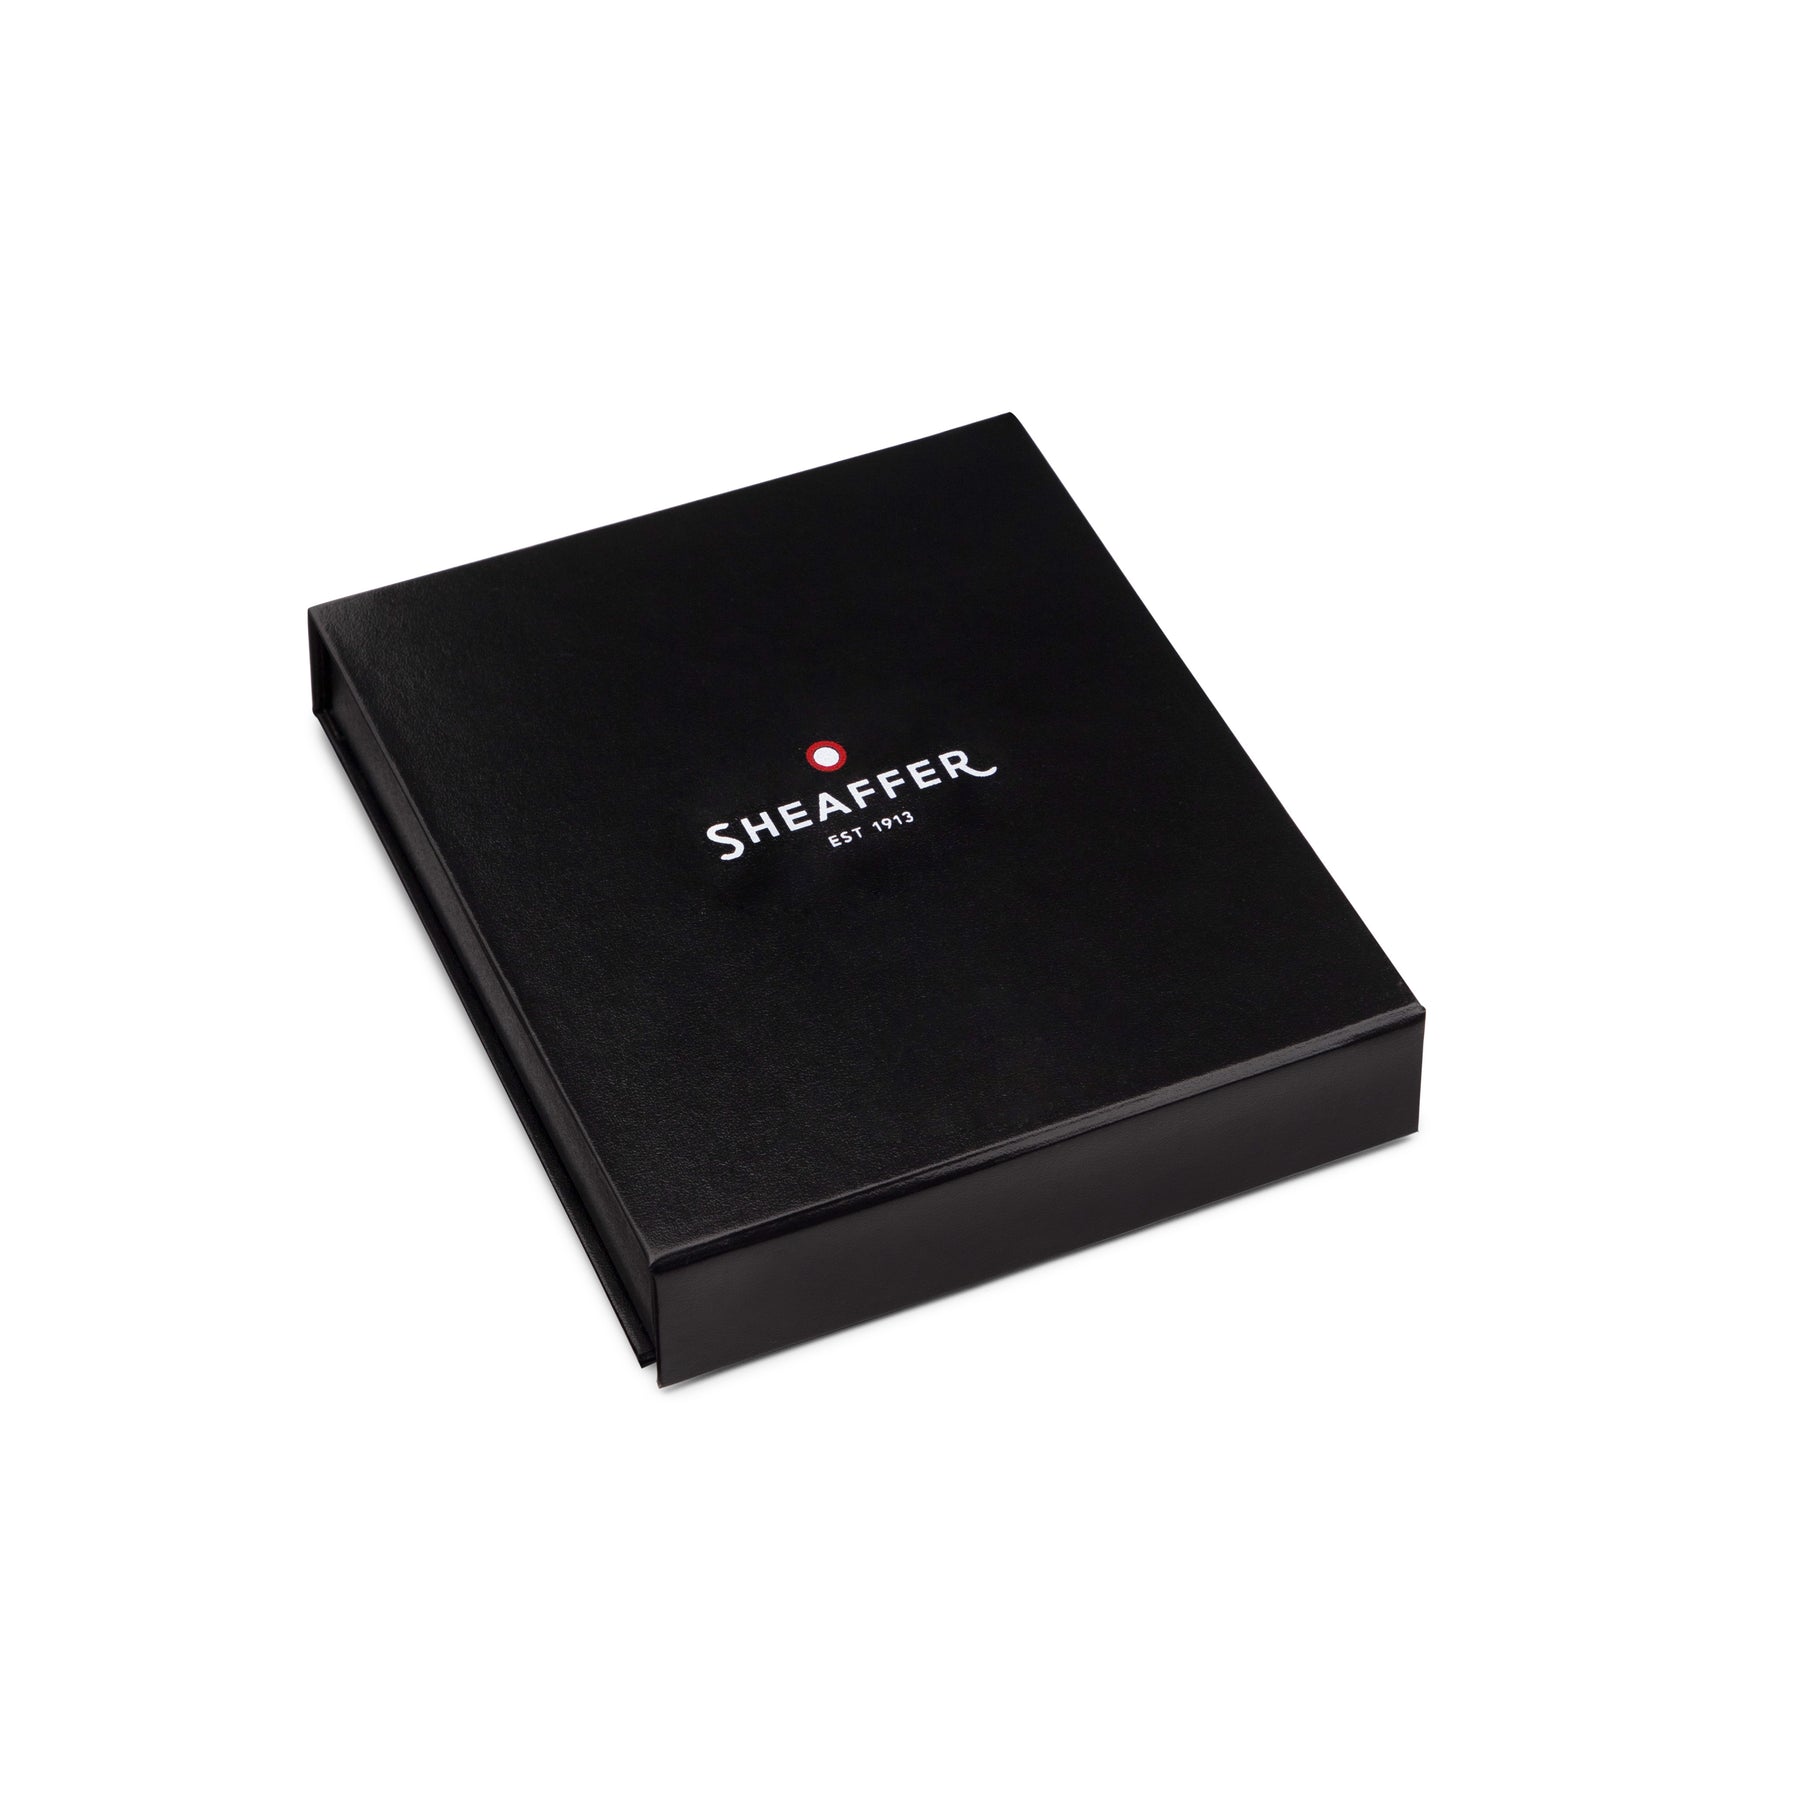 Sheaffer Gift Set ft. Glossy Black 300 Ballpoint Pen with Chrome Trims and Credit Card Holder